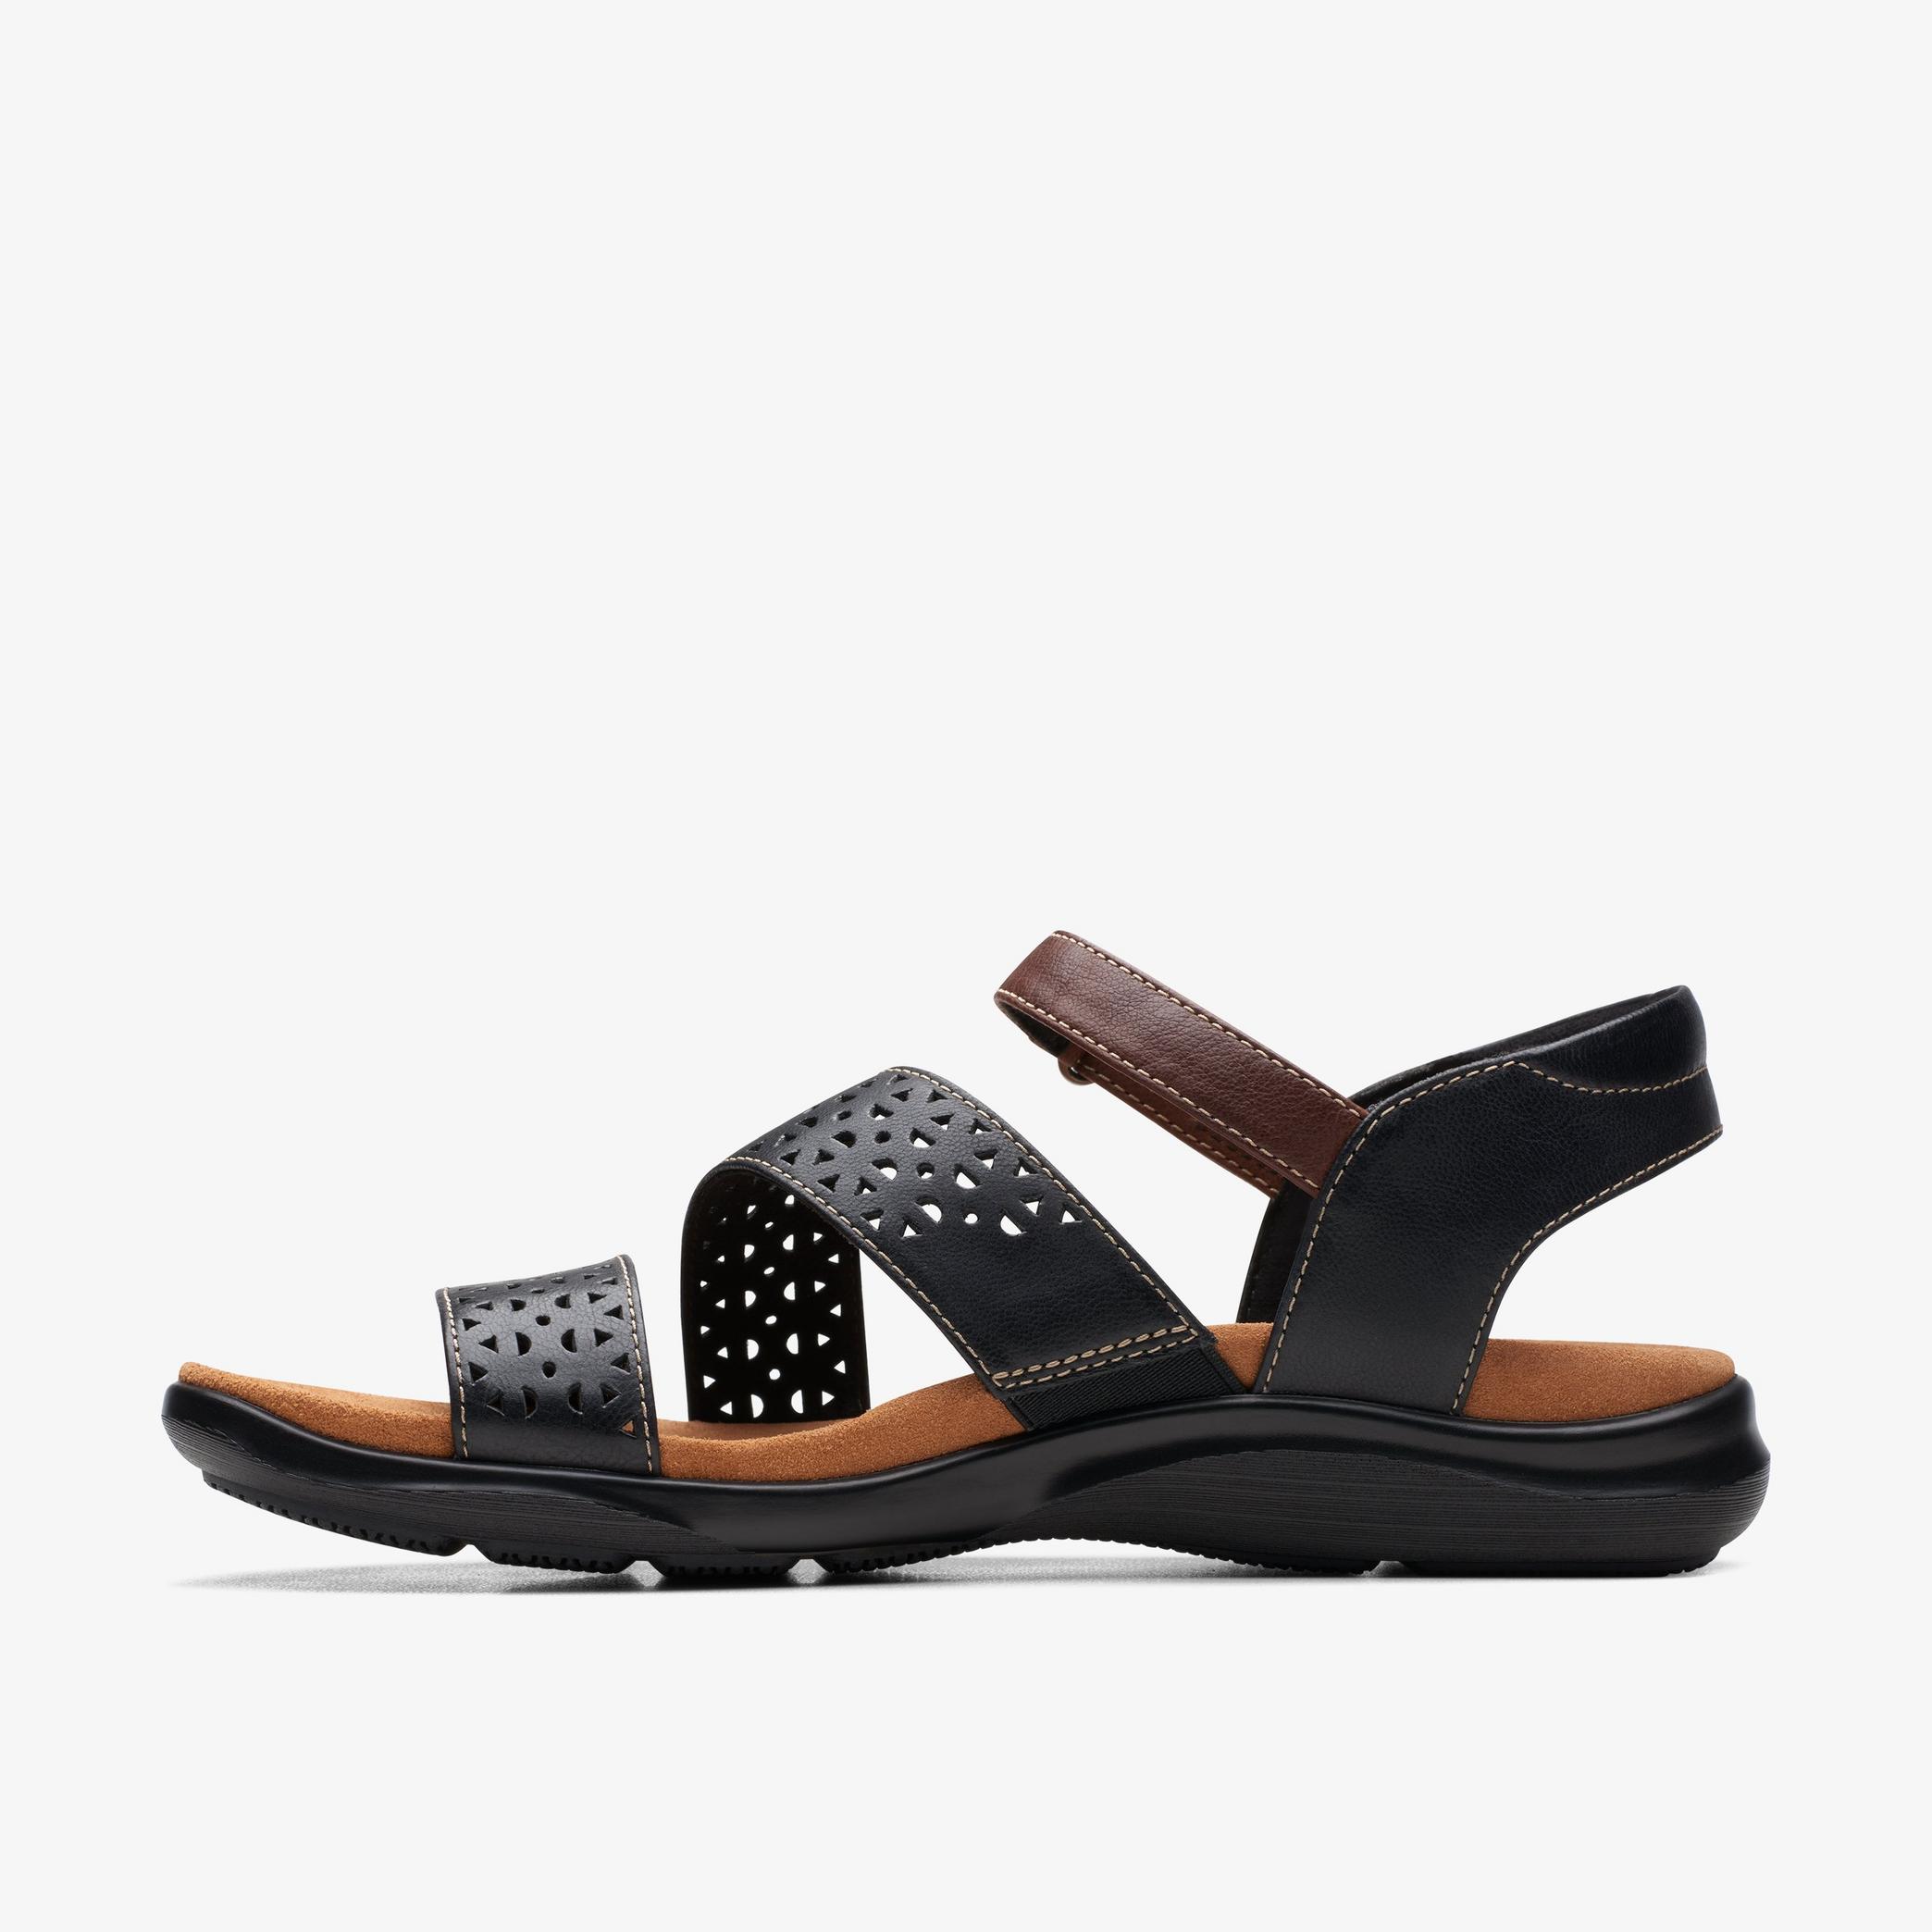 WOMENS Kitly Way Black Leather Flat Sandals | Clarks US